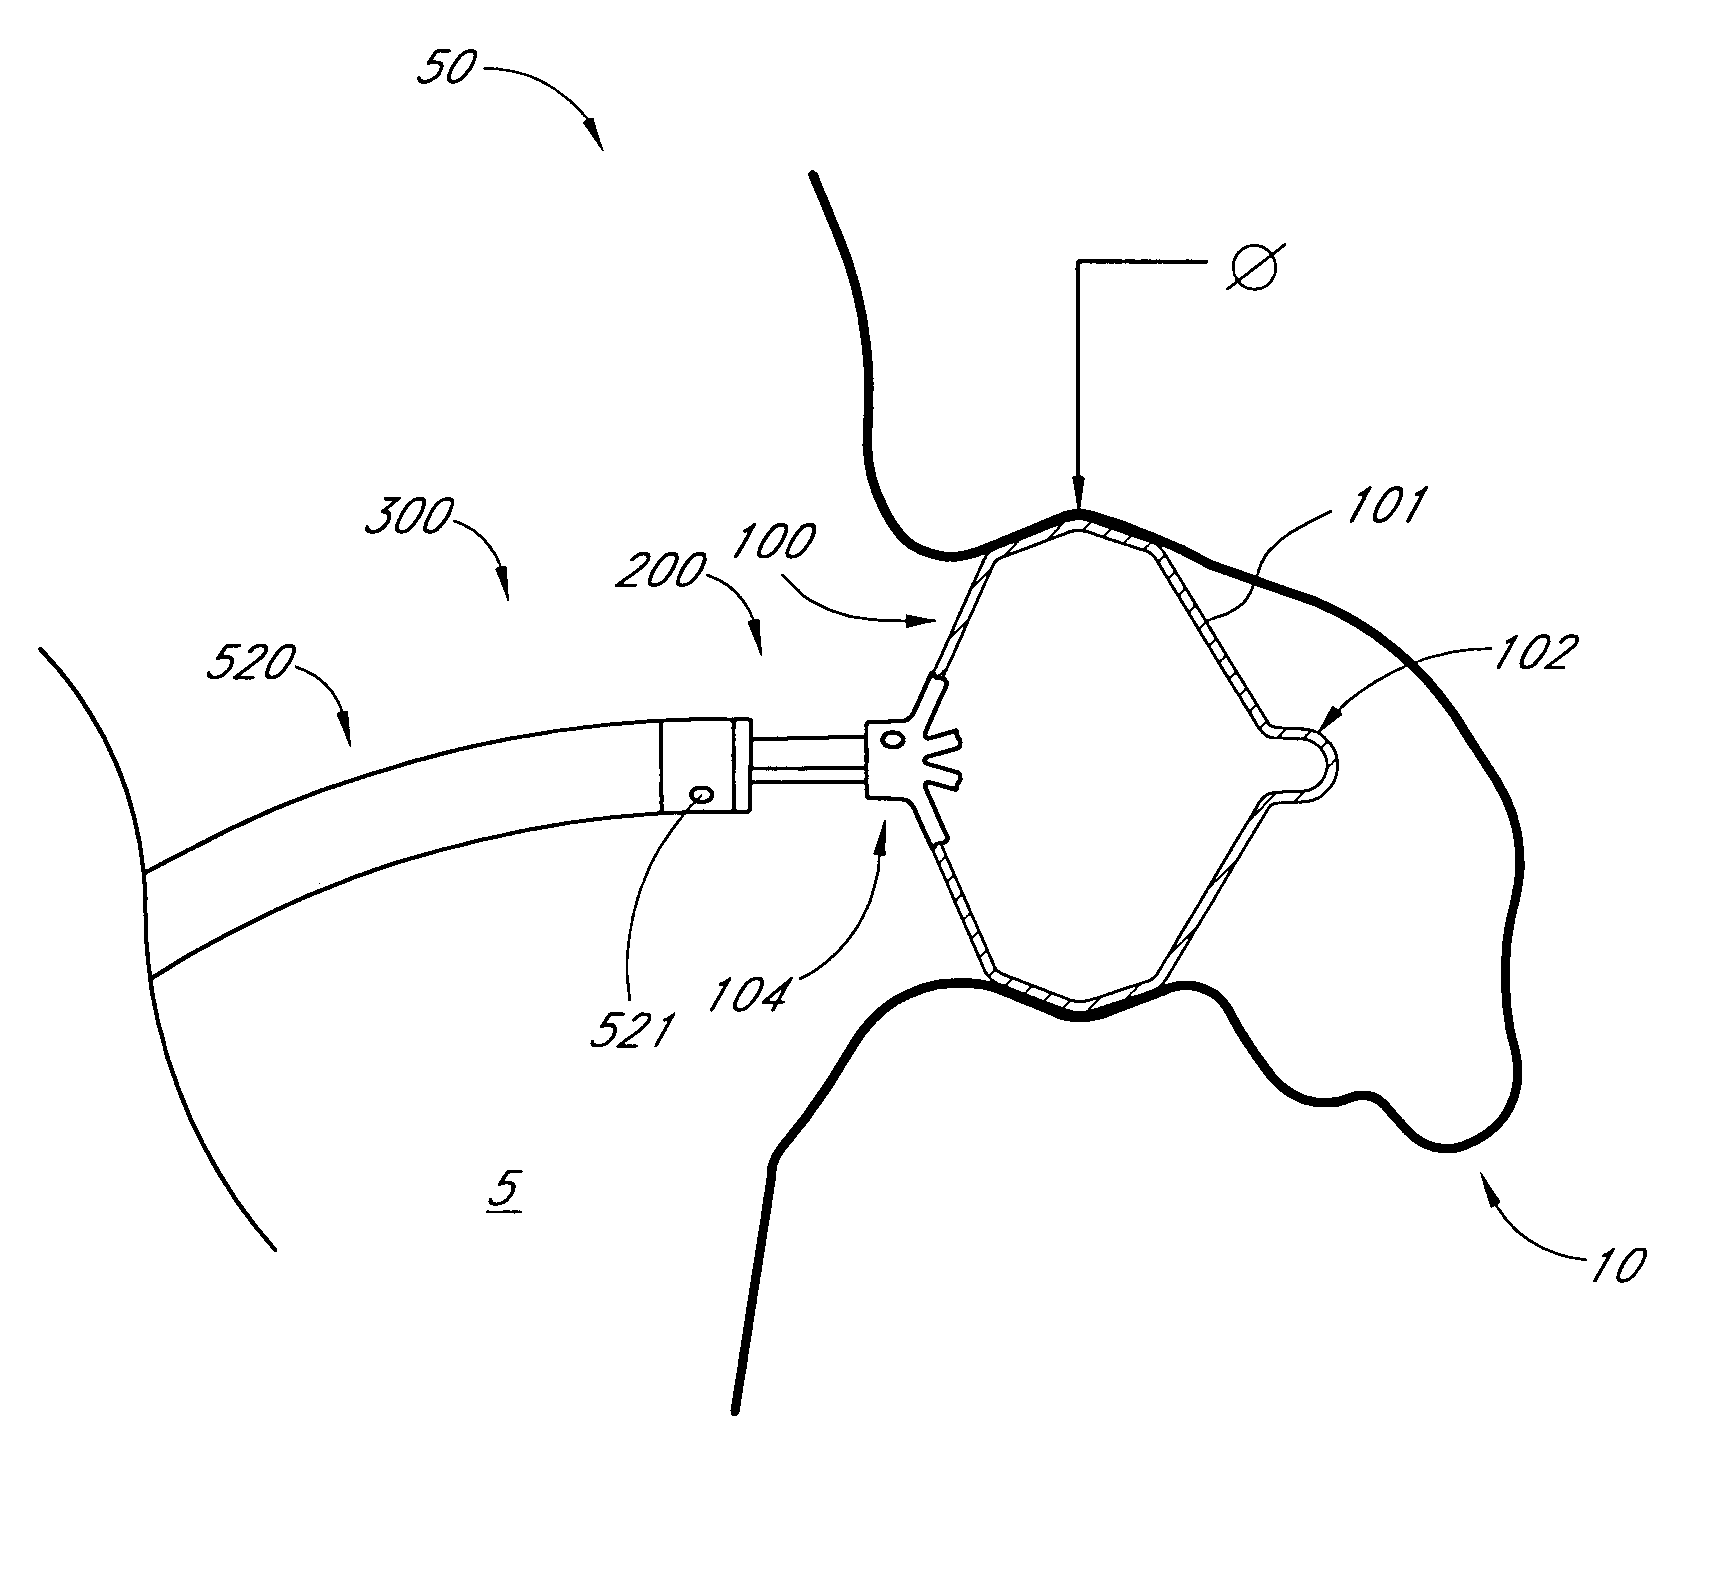 Method and apparatus for delivering an implant without bias to a left atrial appendage